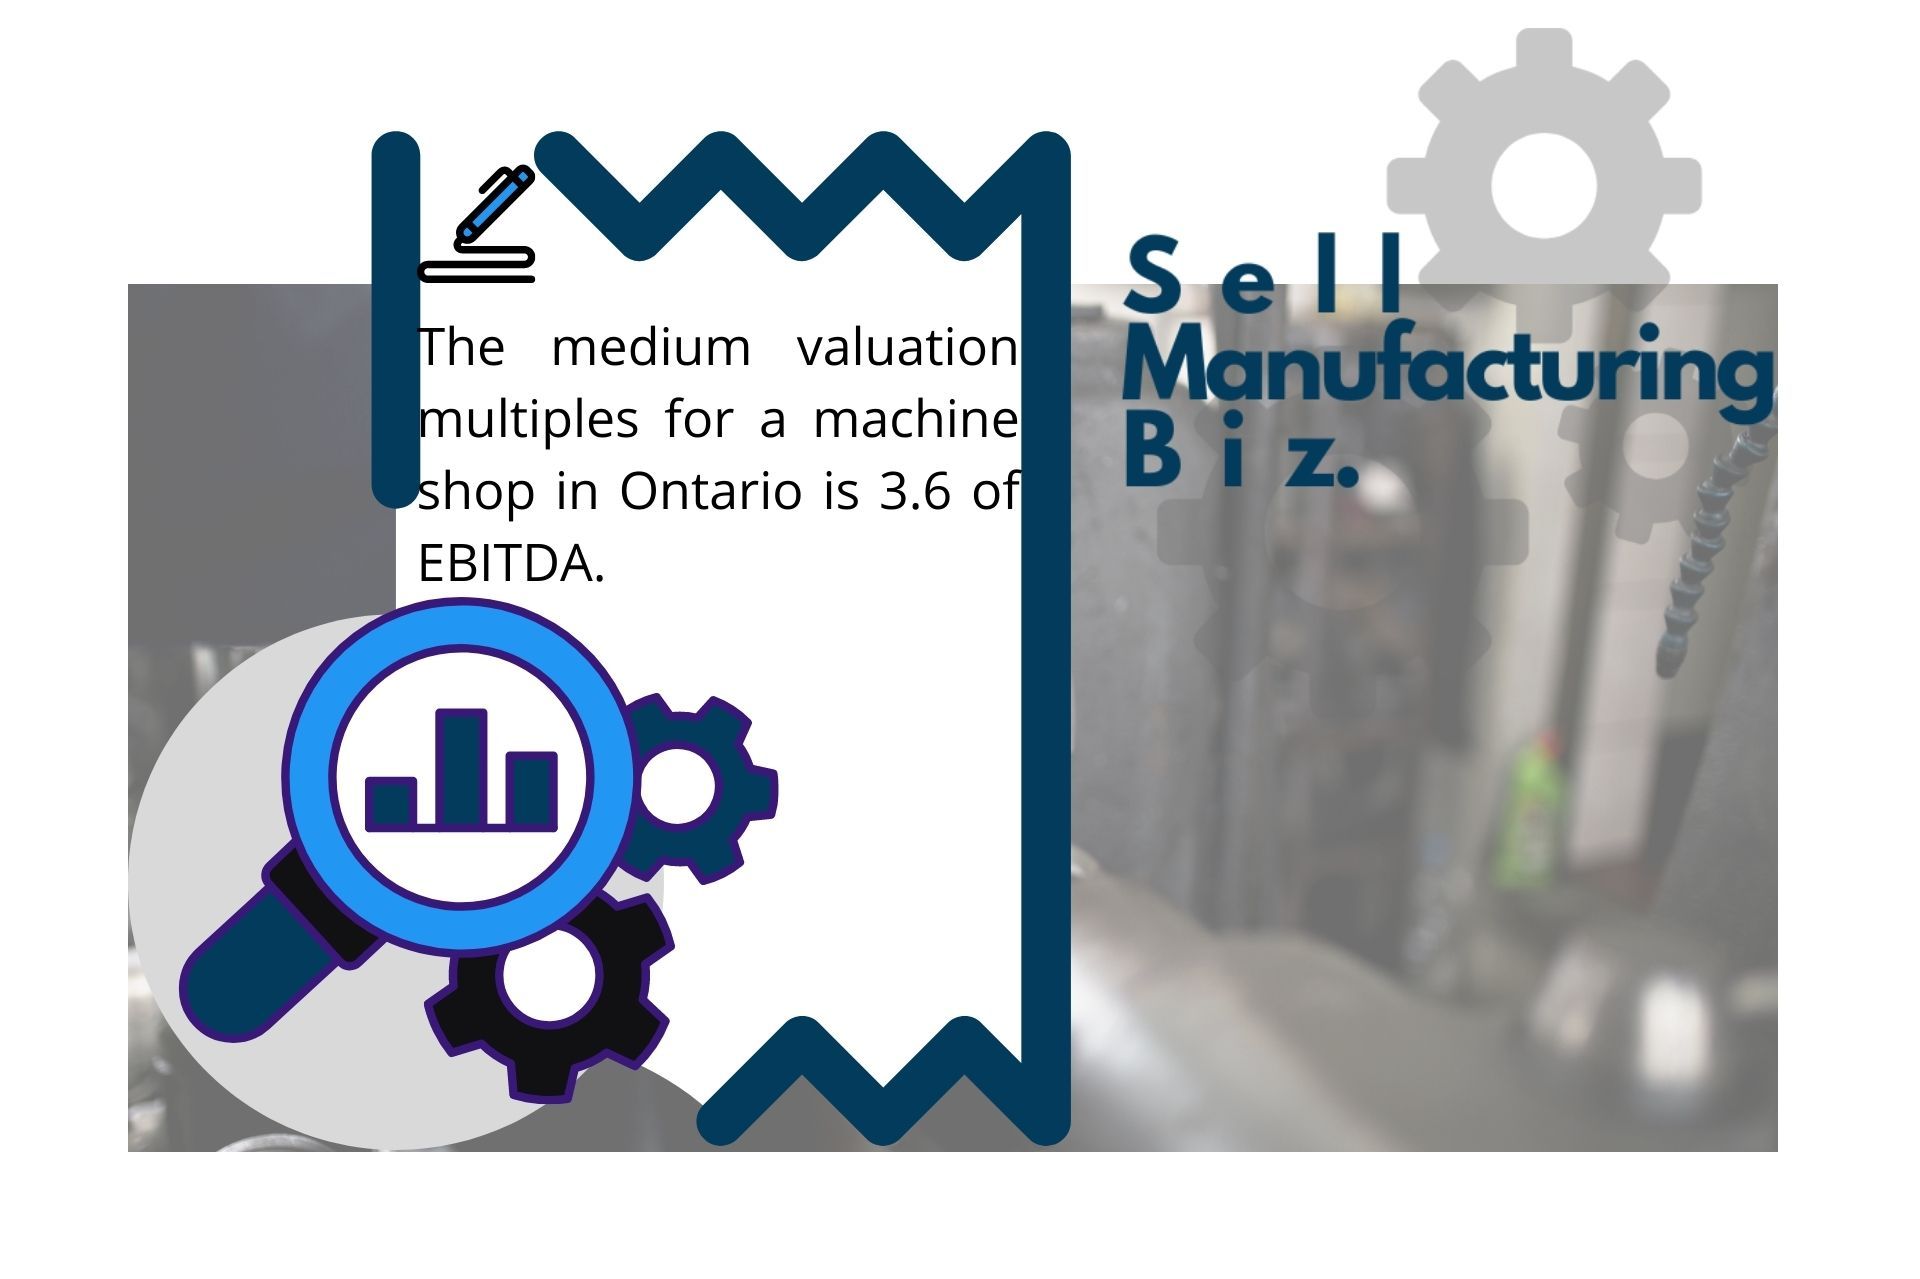 valuation multiples for machine shops in Ontario